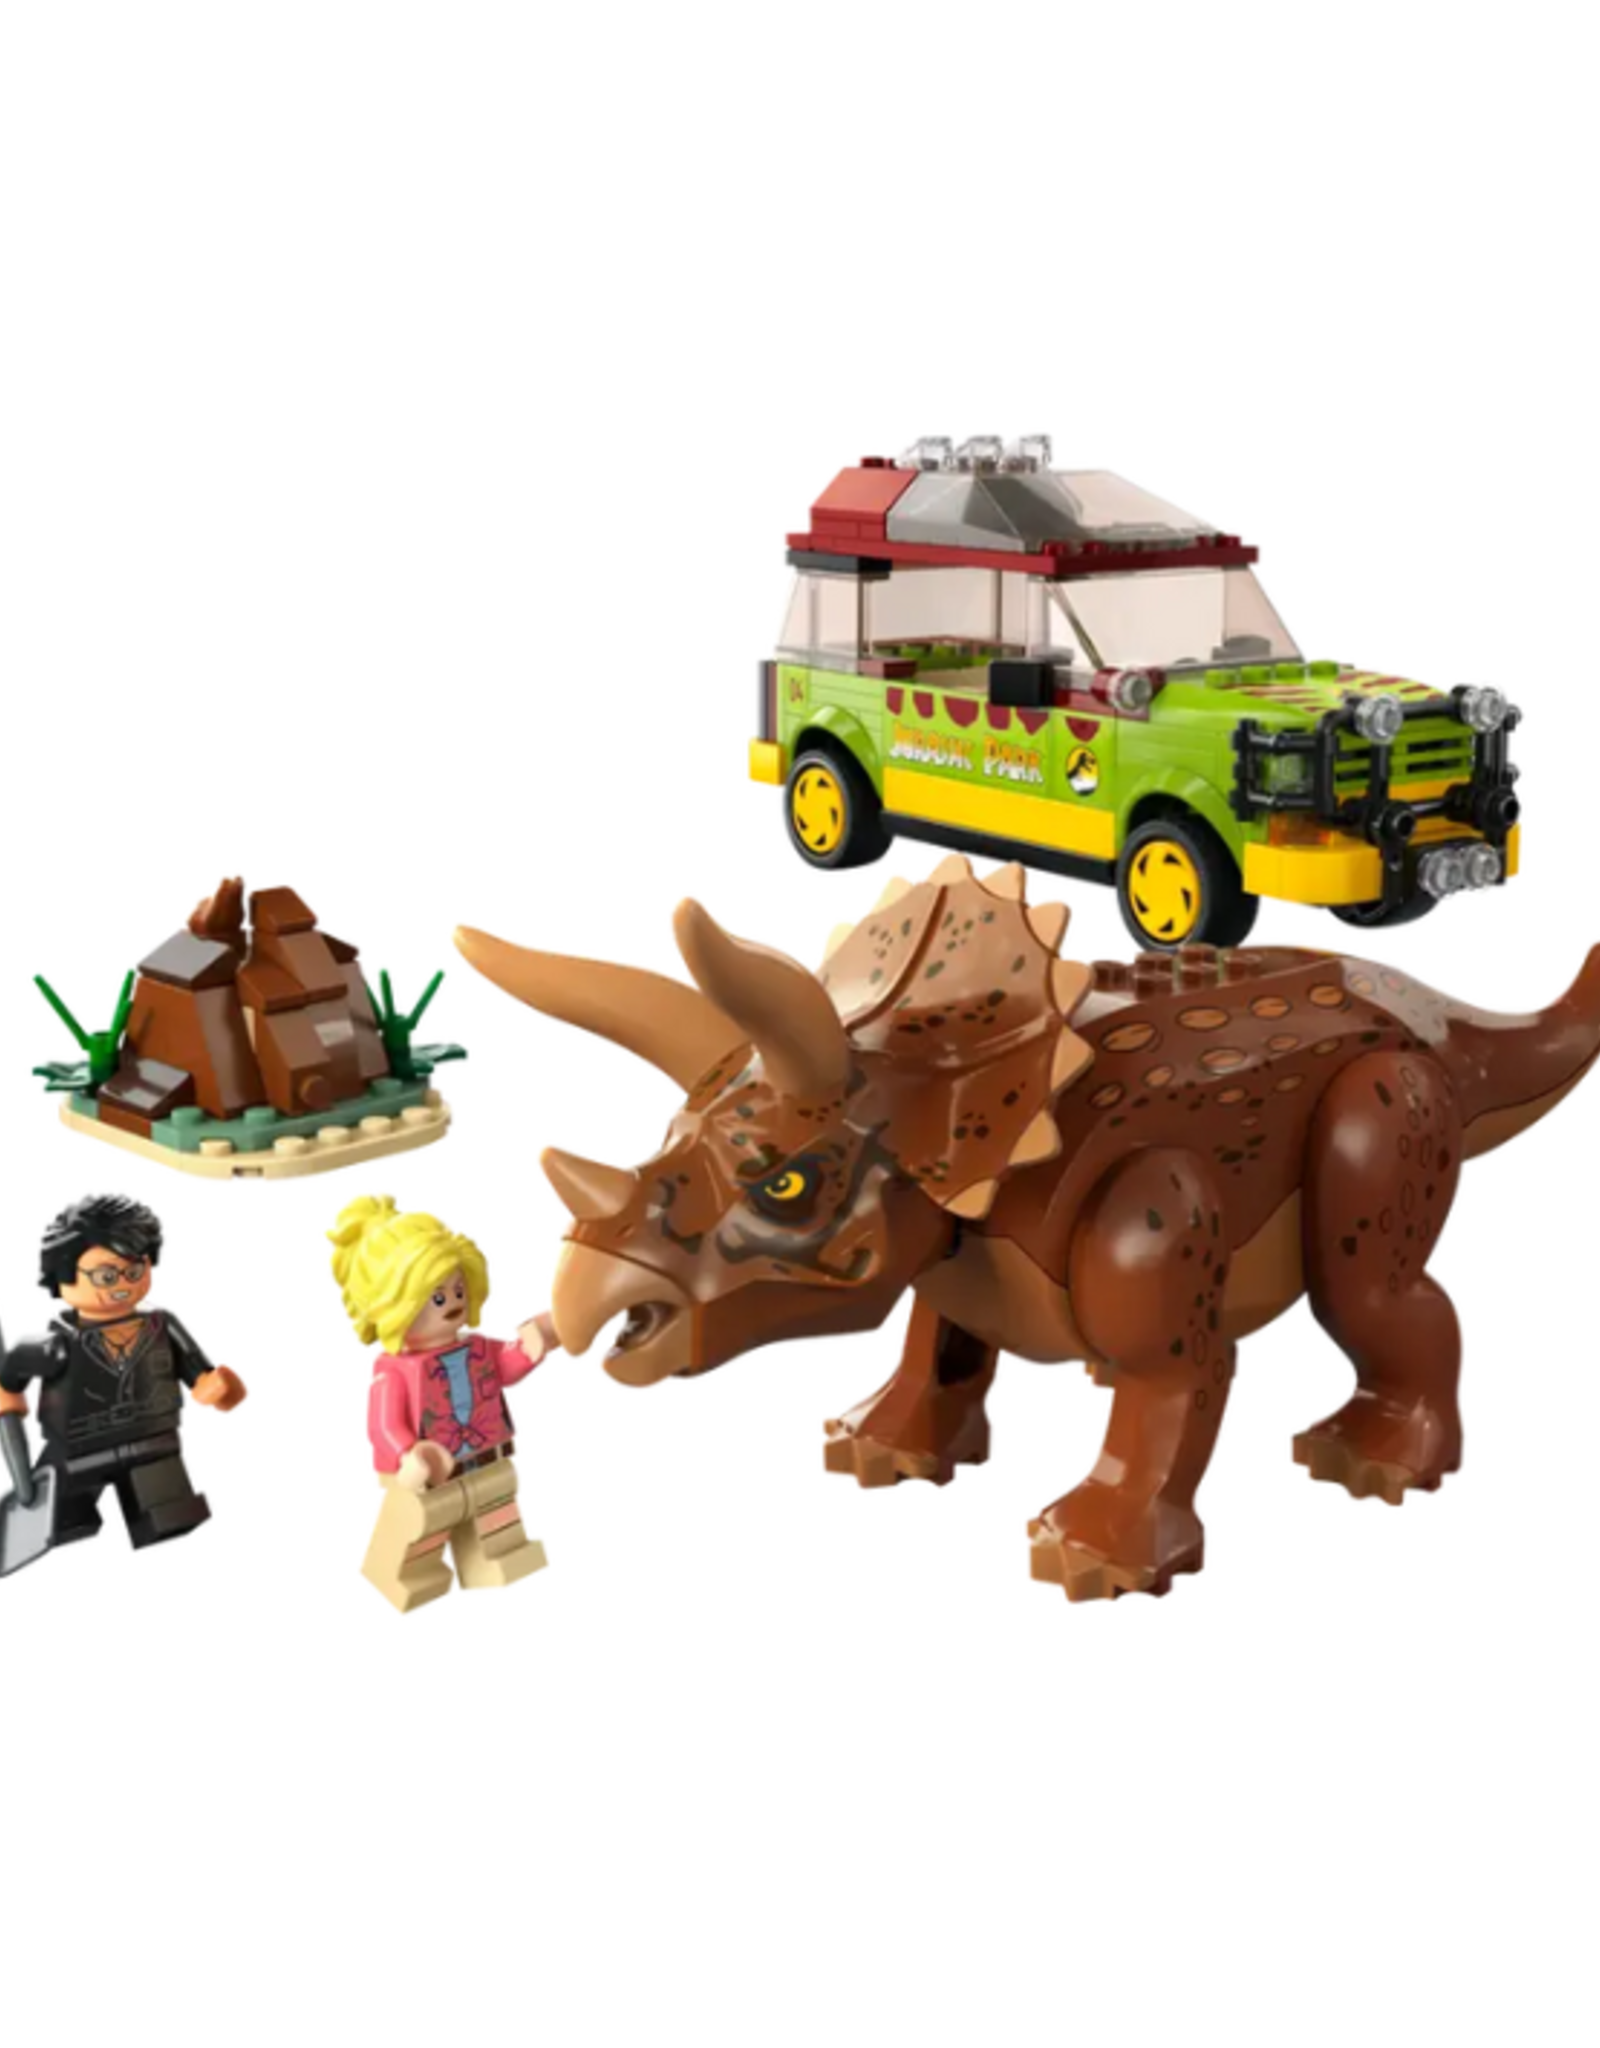 Lego Lego - Jurassic World - 76959 - Triceratops Research